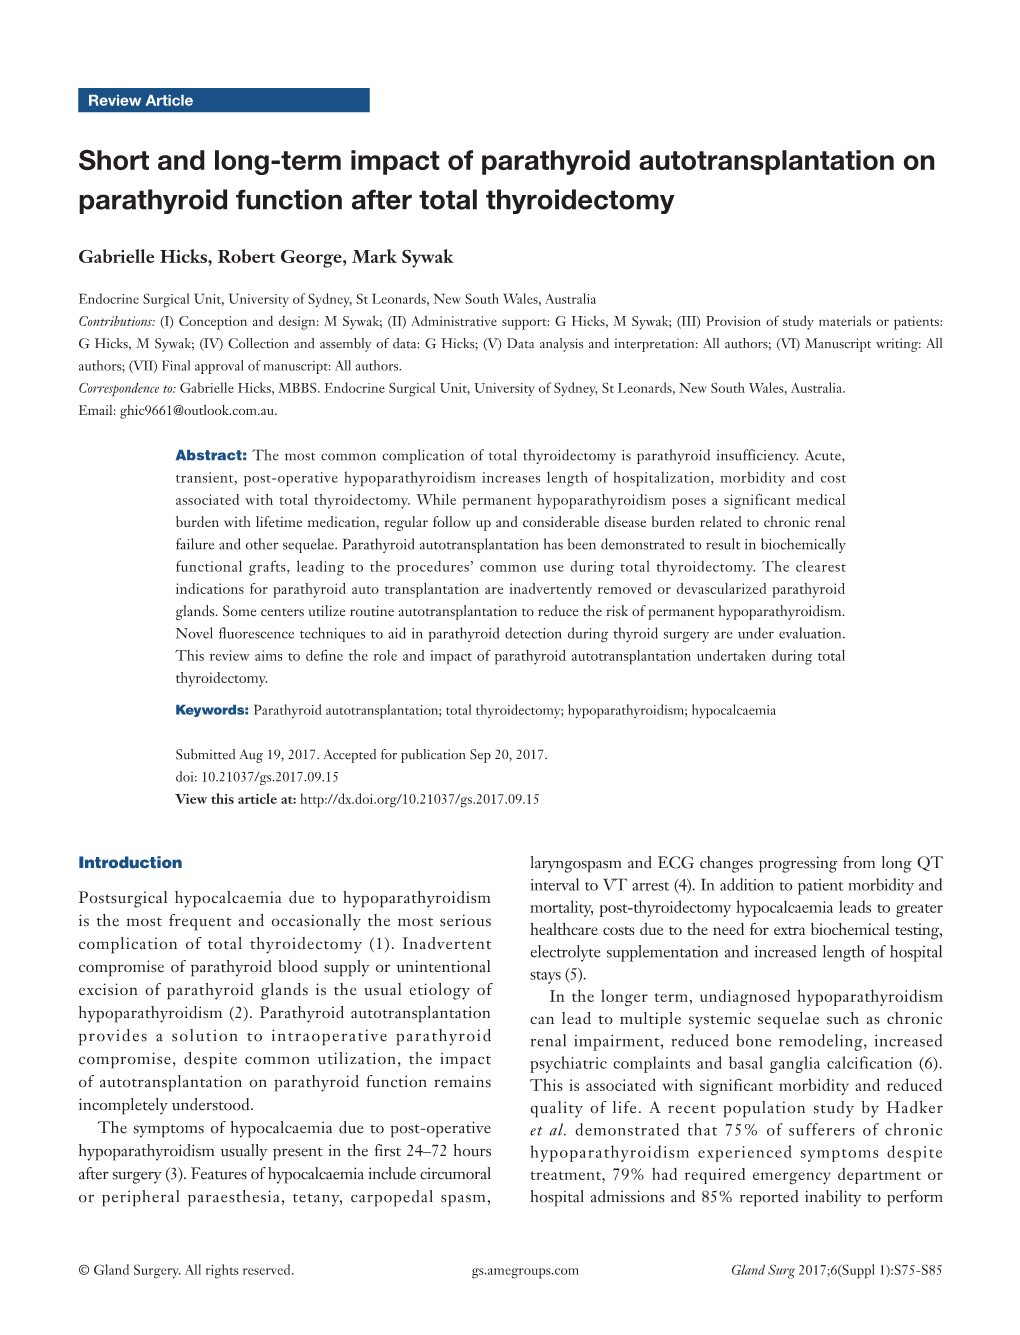 Short and Long-Term Impact of Parathyroid Autotransplantation on Parathyroid Function After Total Thyroidectomy